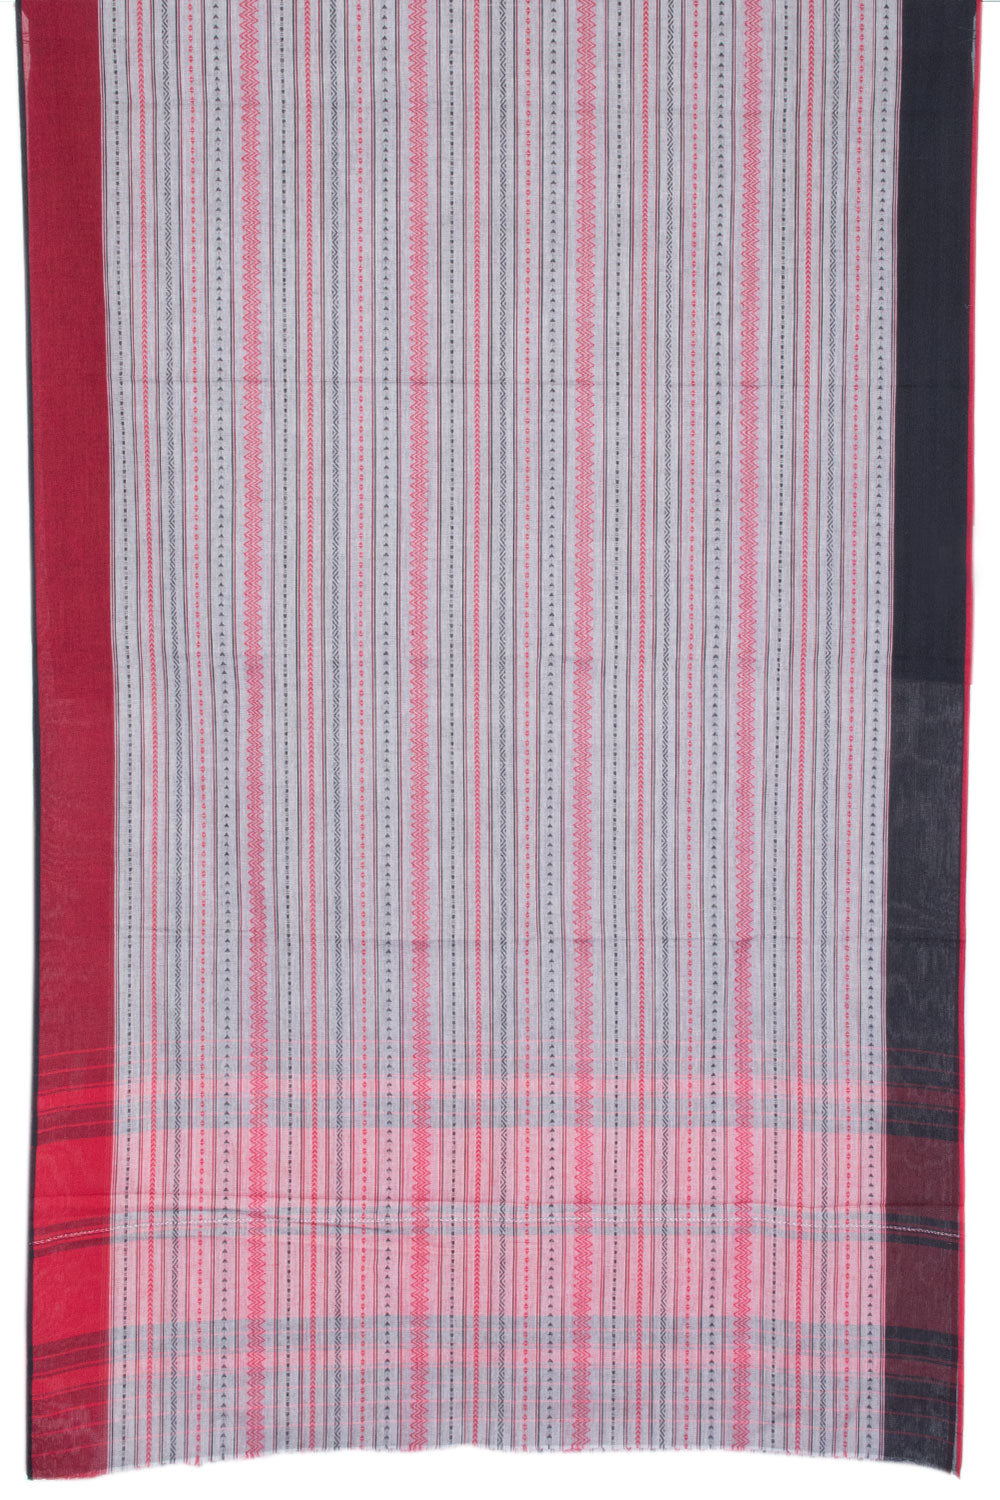 Grey with Red Handloom Dhaniakhali Cotton Saree - 10063551